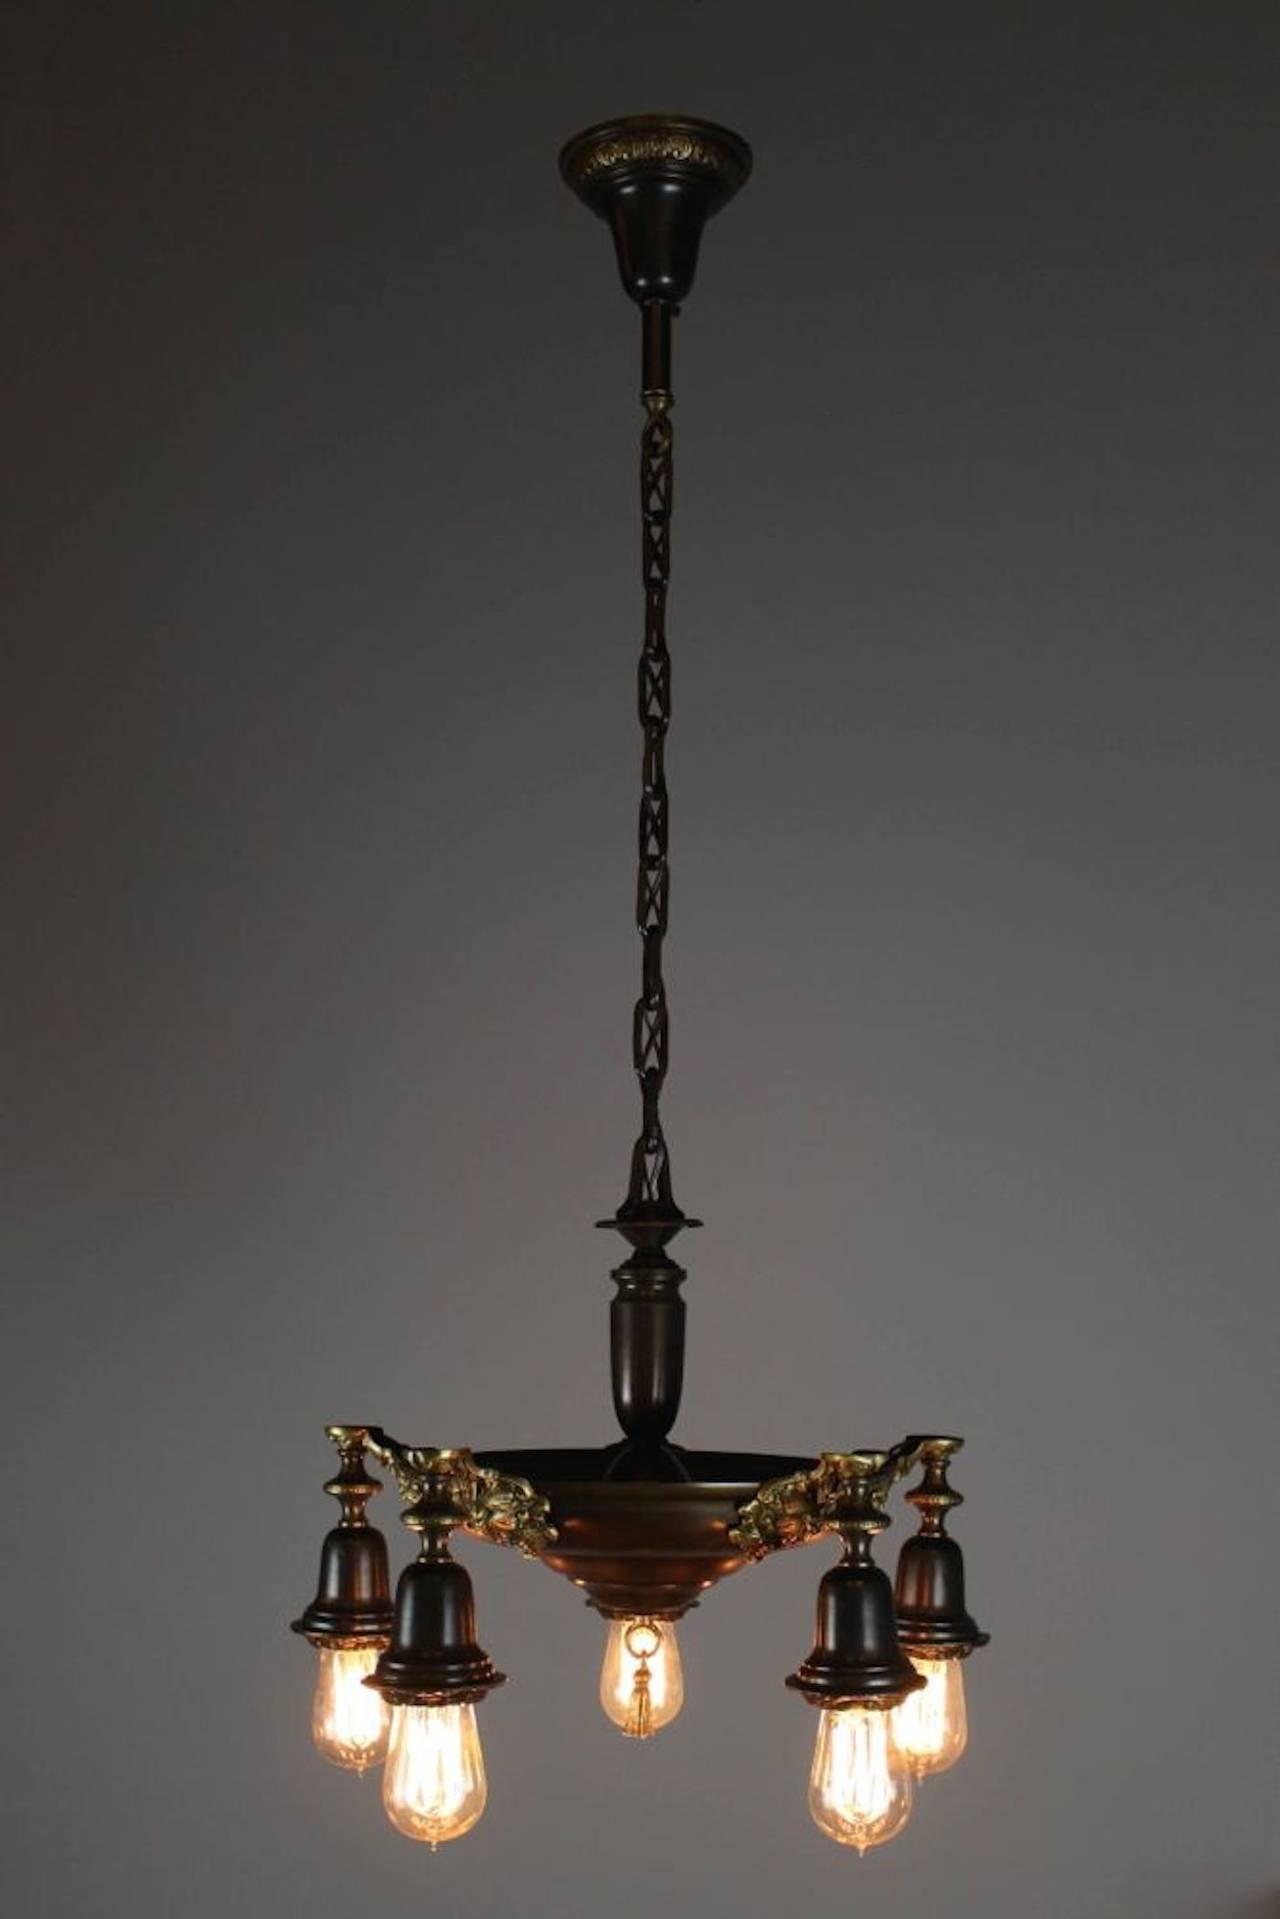 Circa 1915. A great looking pan fixture with two-tone brass. Body in dark chocolate bronze, with decorative castings in a gold-olive bronze. Fitted with Edison bulbs. Cleaned, rewired, restored, and ready to hang. 

Measurements: 42